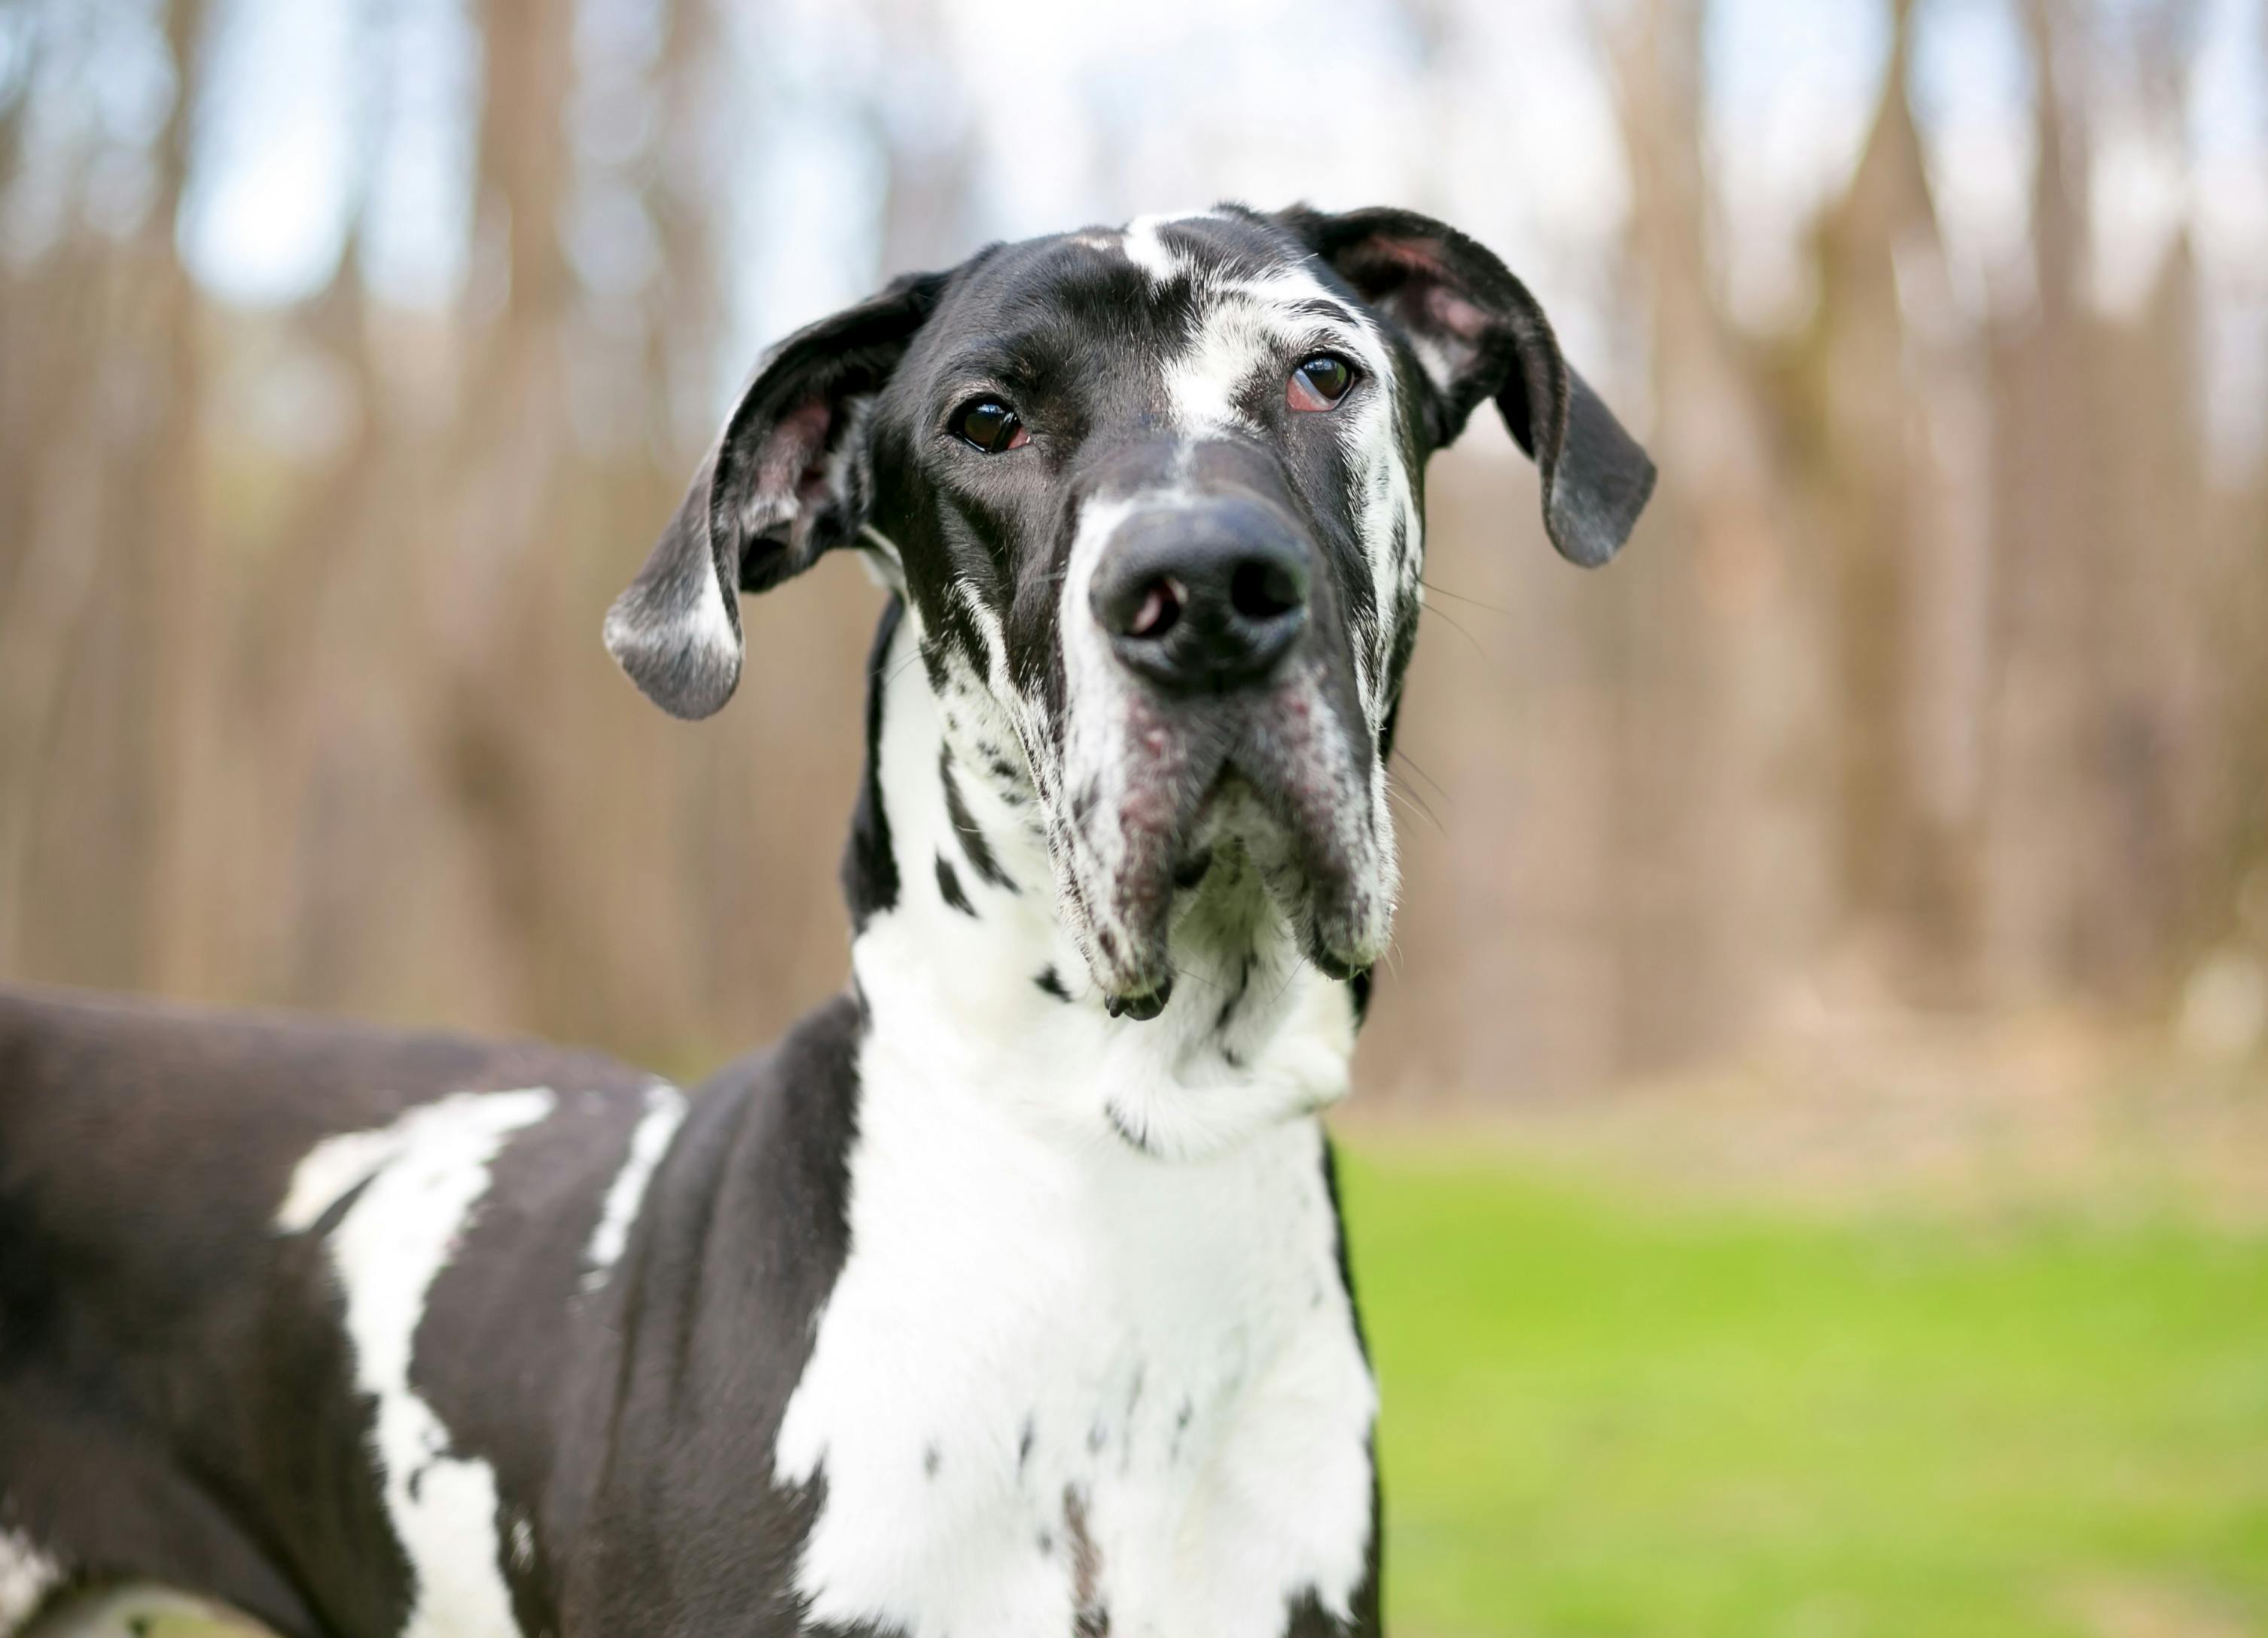 White and grey spotted Great Dane mix